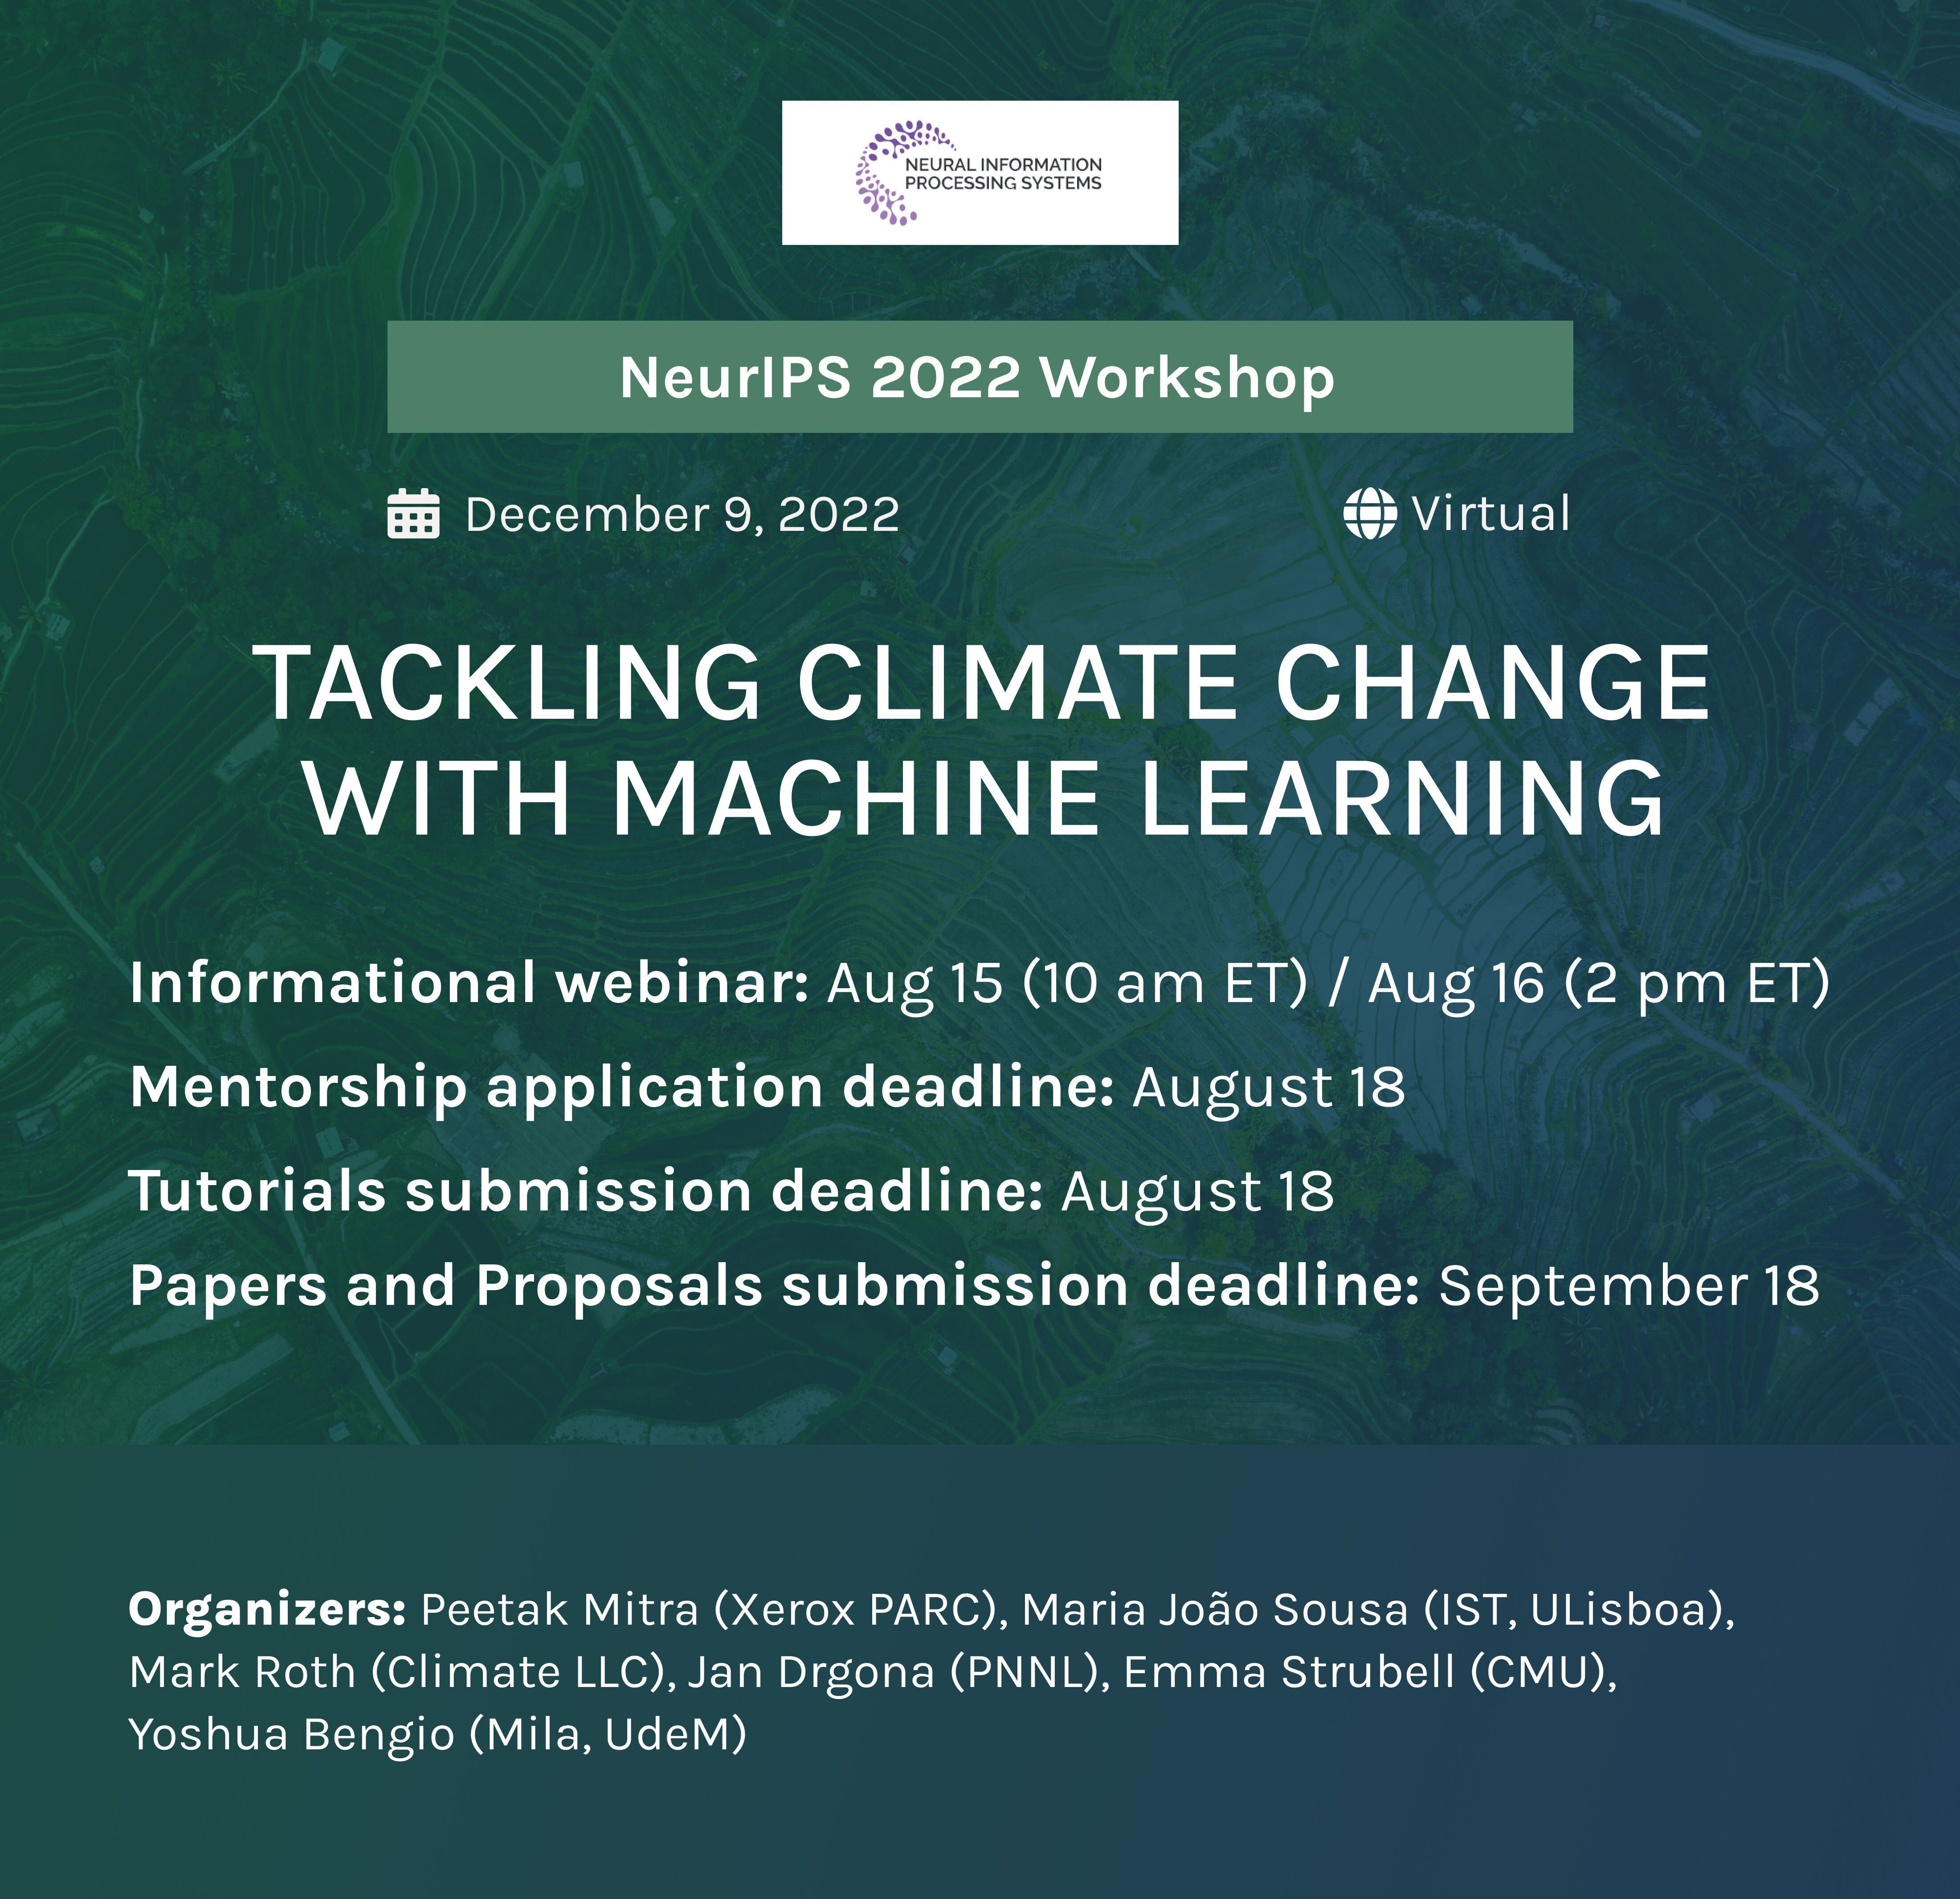 Tackling Climate Change with Machine Learning at NeurIPS 2022